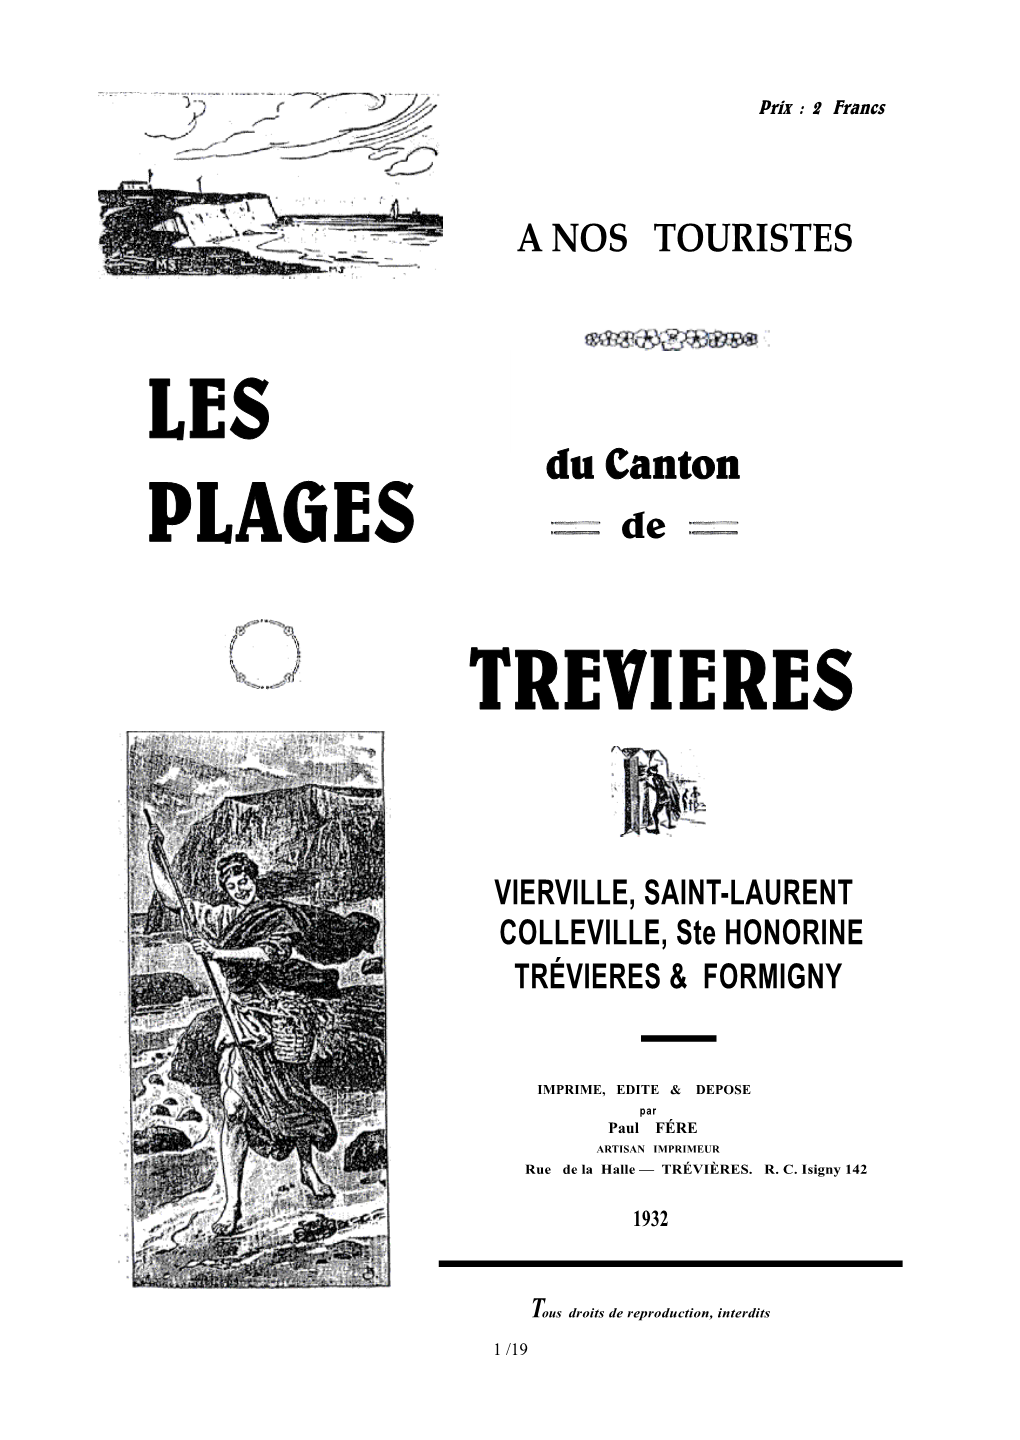 Les Plages Trevieres